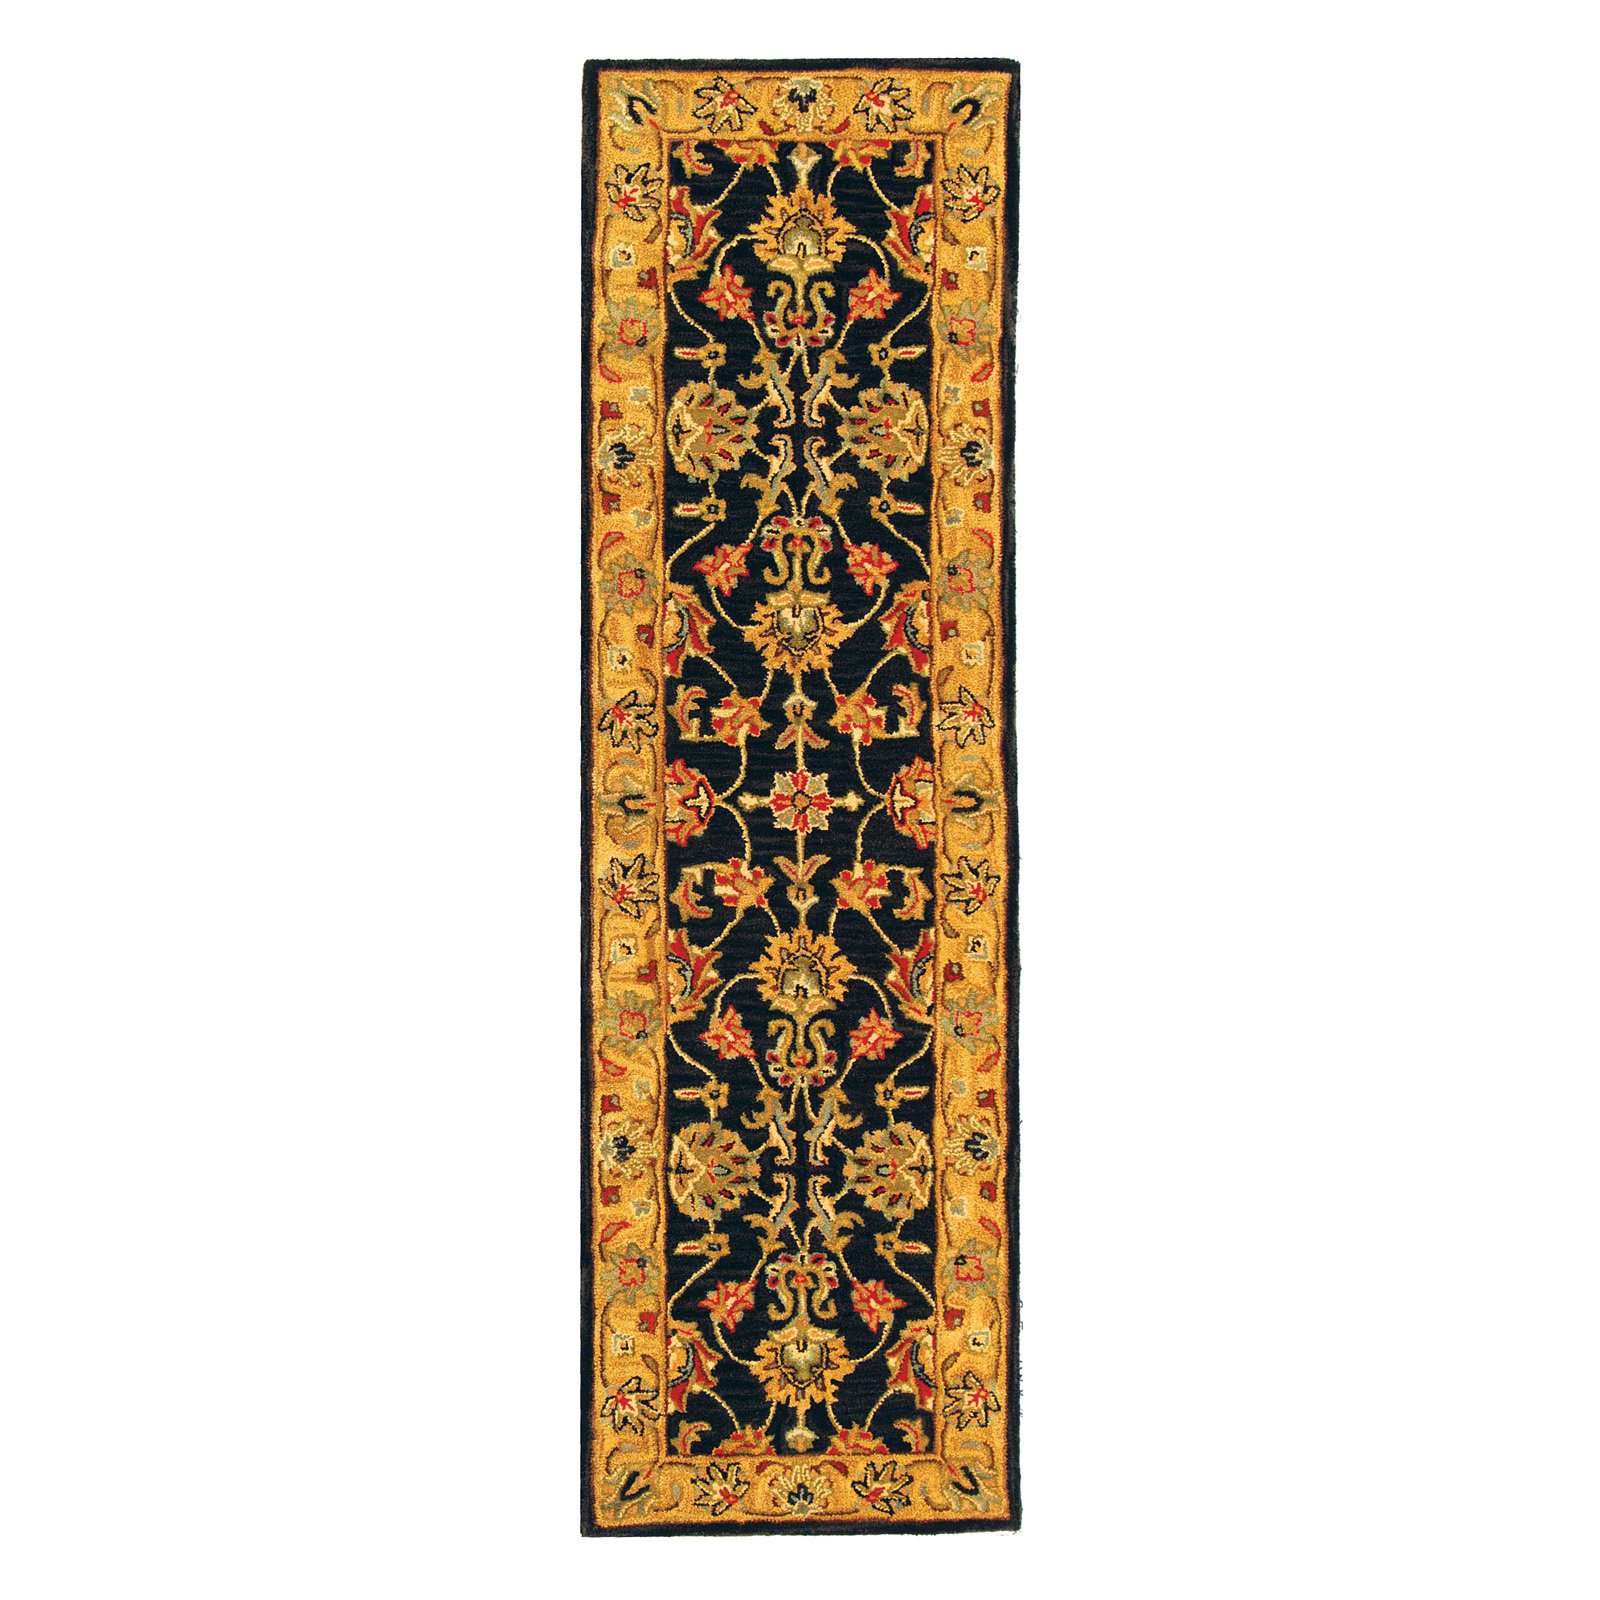 SAFAVIEH Heritage Regis Traditional Wool Area Rug, Charcoal/Gold, 5' x 8' - image 4 of 10